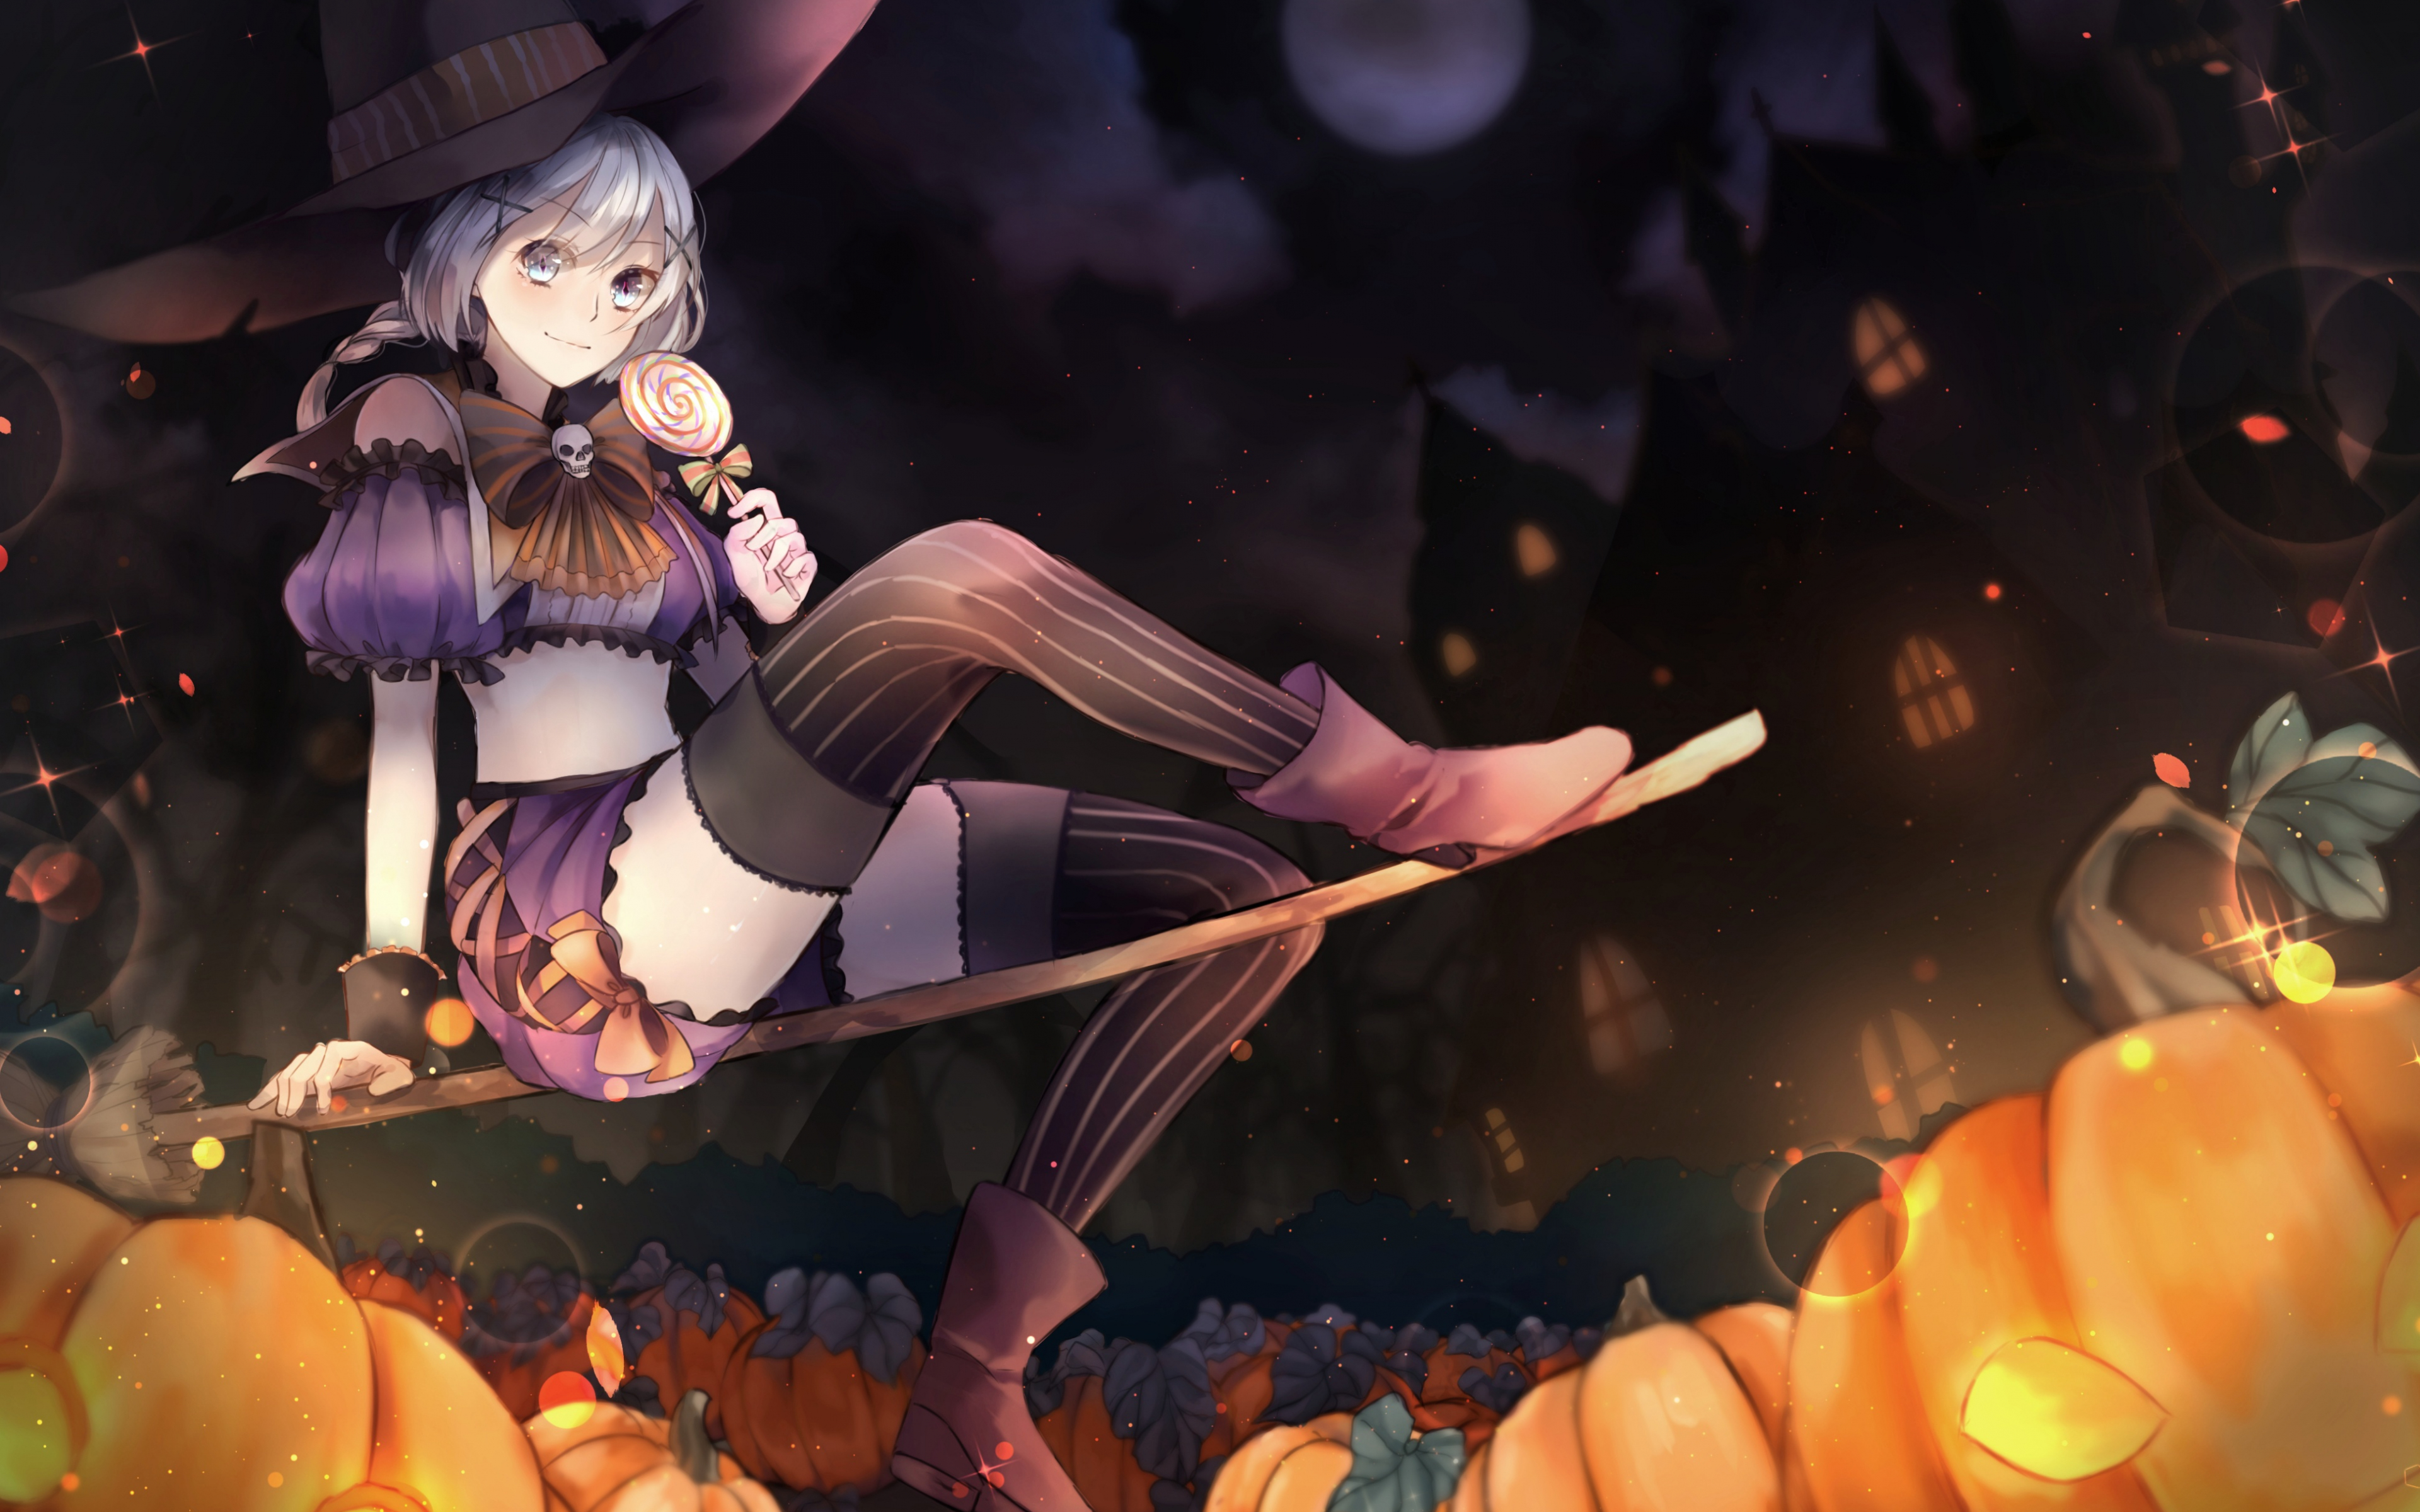 Desktop Wallpaper Halloween, Anime Girl, Eating Candy, 4k, HD Image, Picture, Background, 288f05